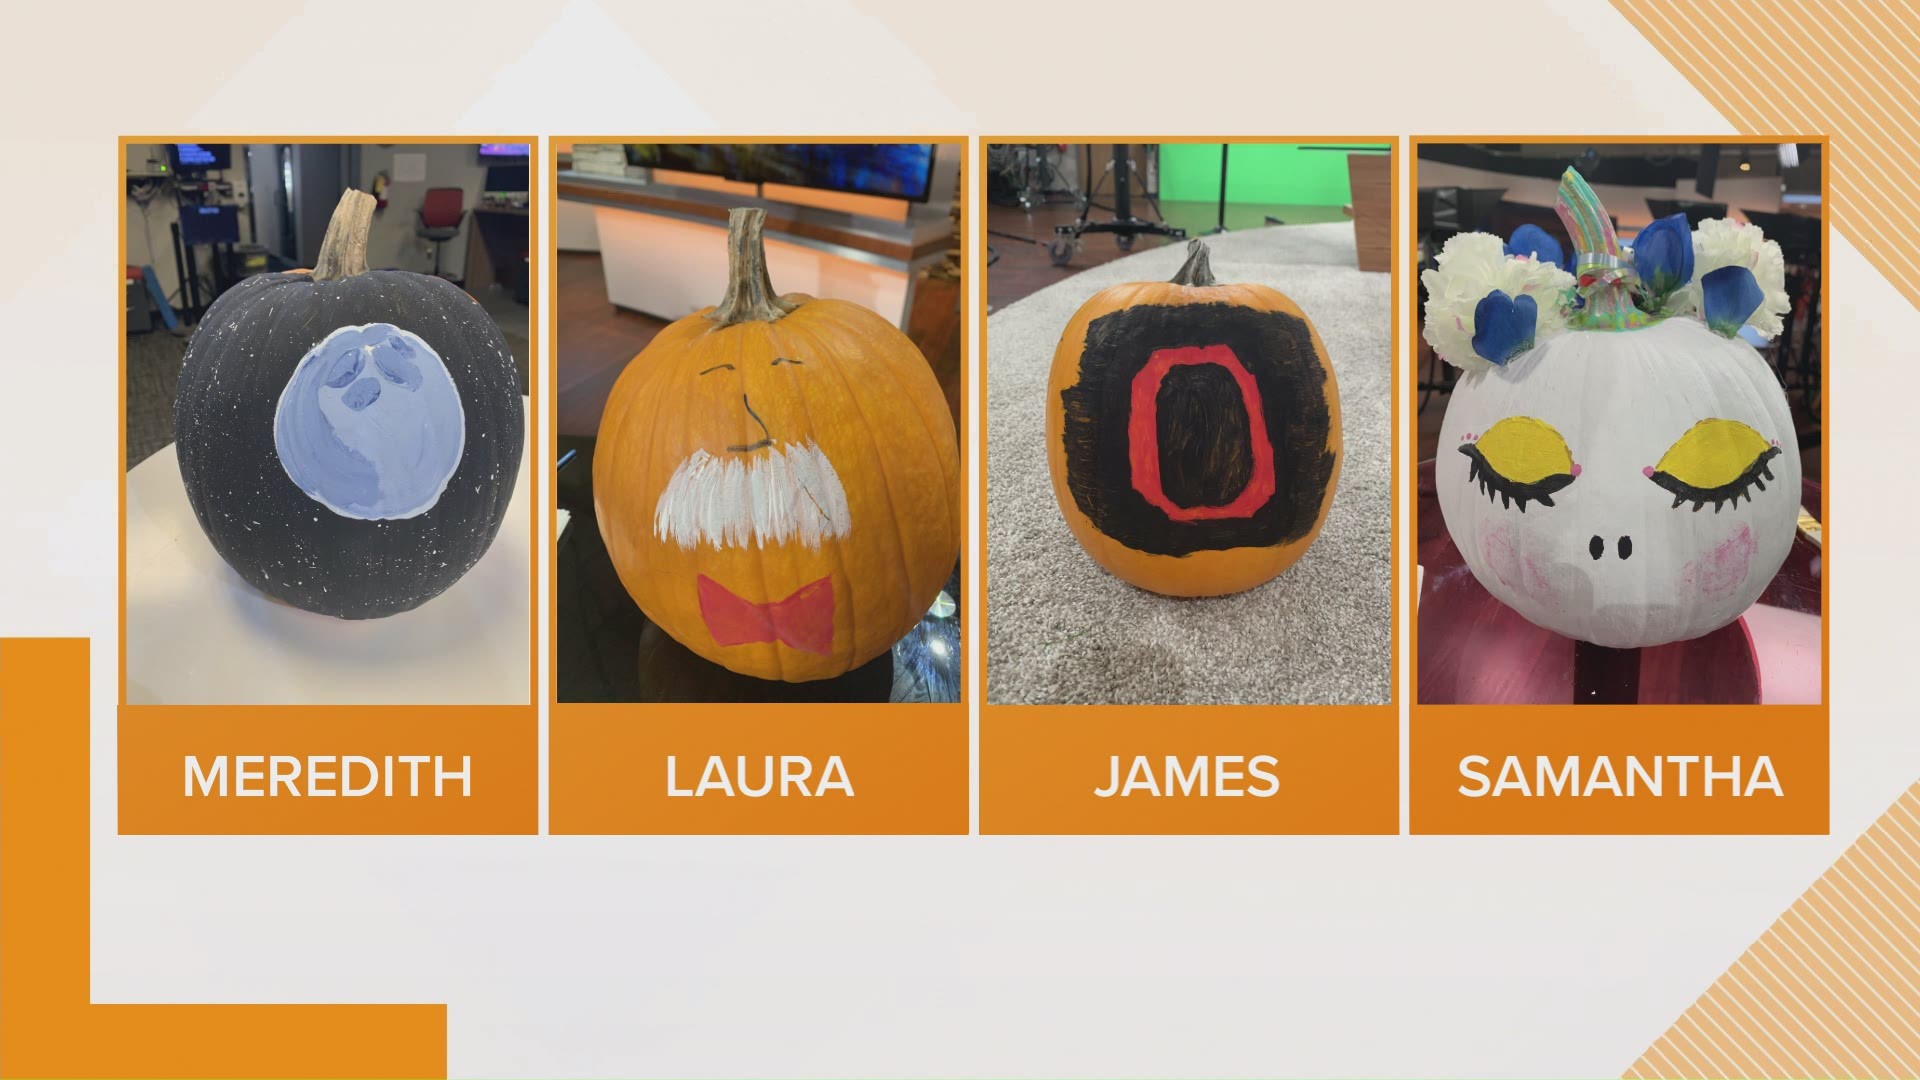 13 On Your Side Morning team takes on their first ever Pumpkin Battle.